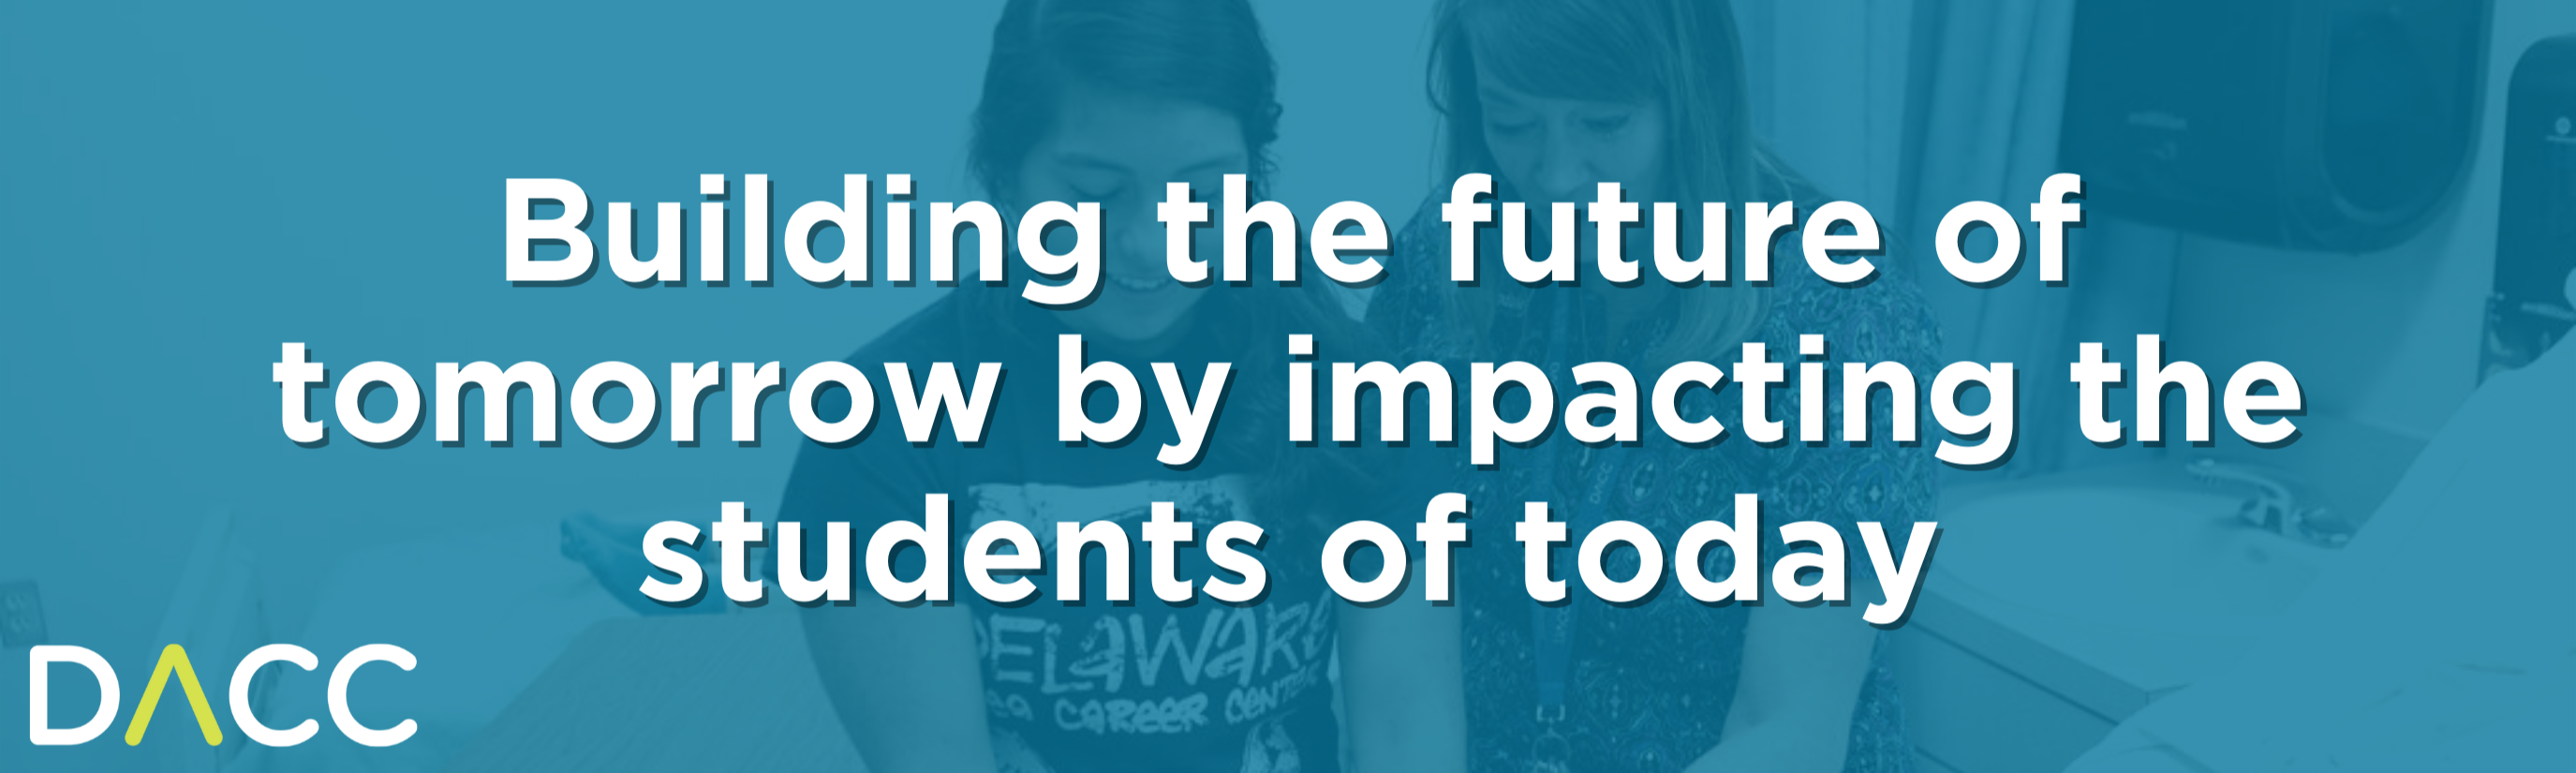 Building the future of tomorrow by impacting the students of today